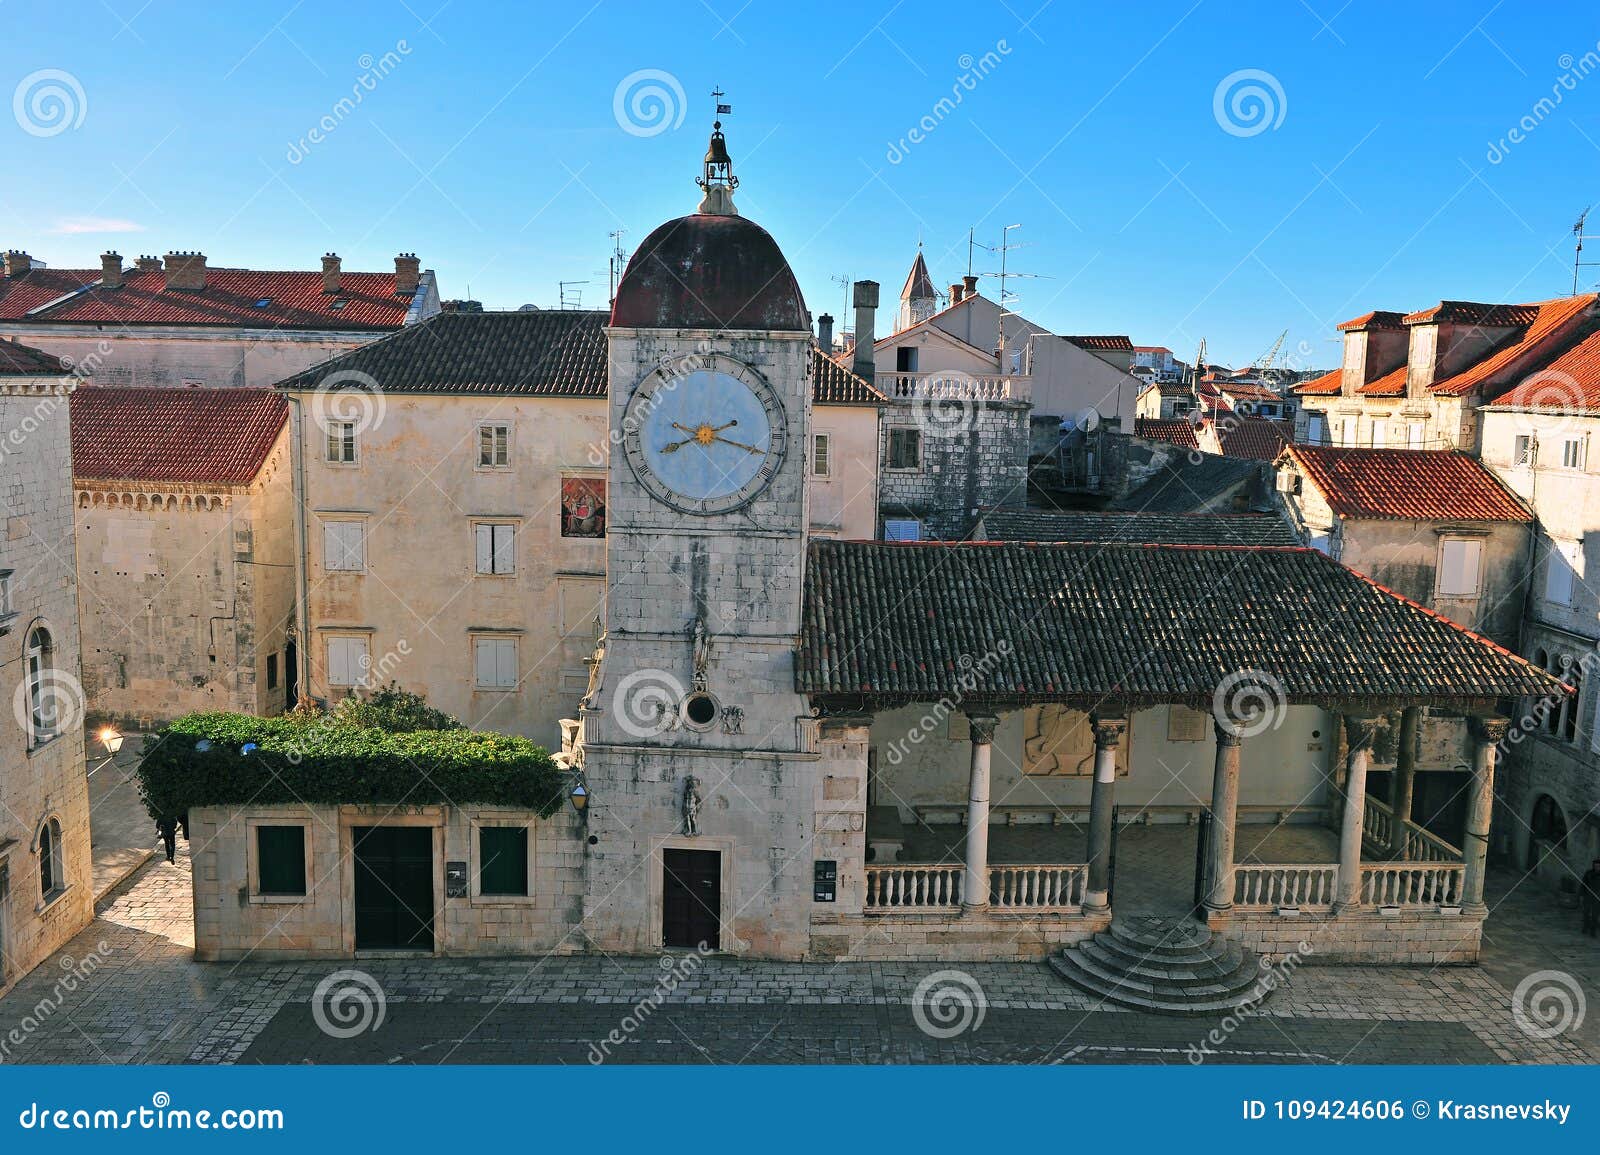 top view of townsquare of trogir